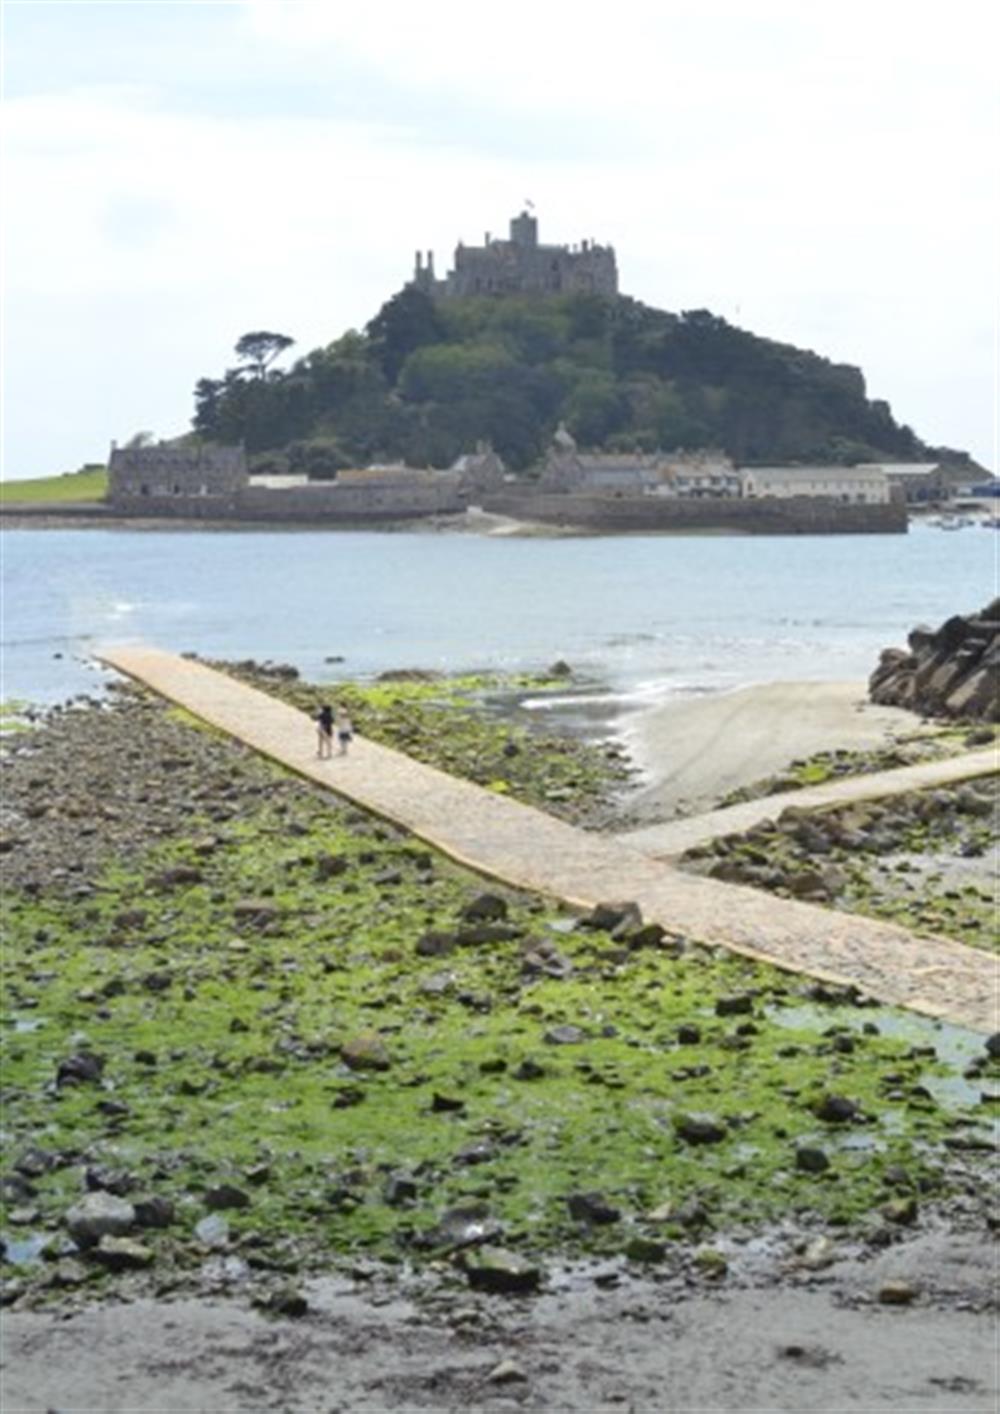 St Michael's Mount is a 45 minute drive. Walk across the causeway or catch the water-taxi to the island.